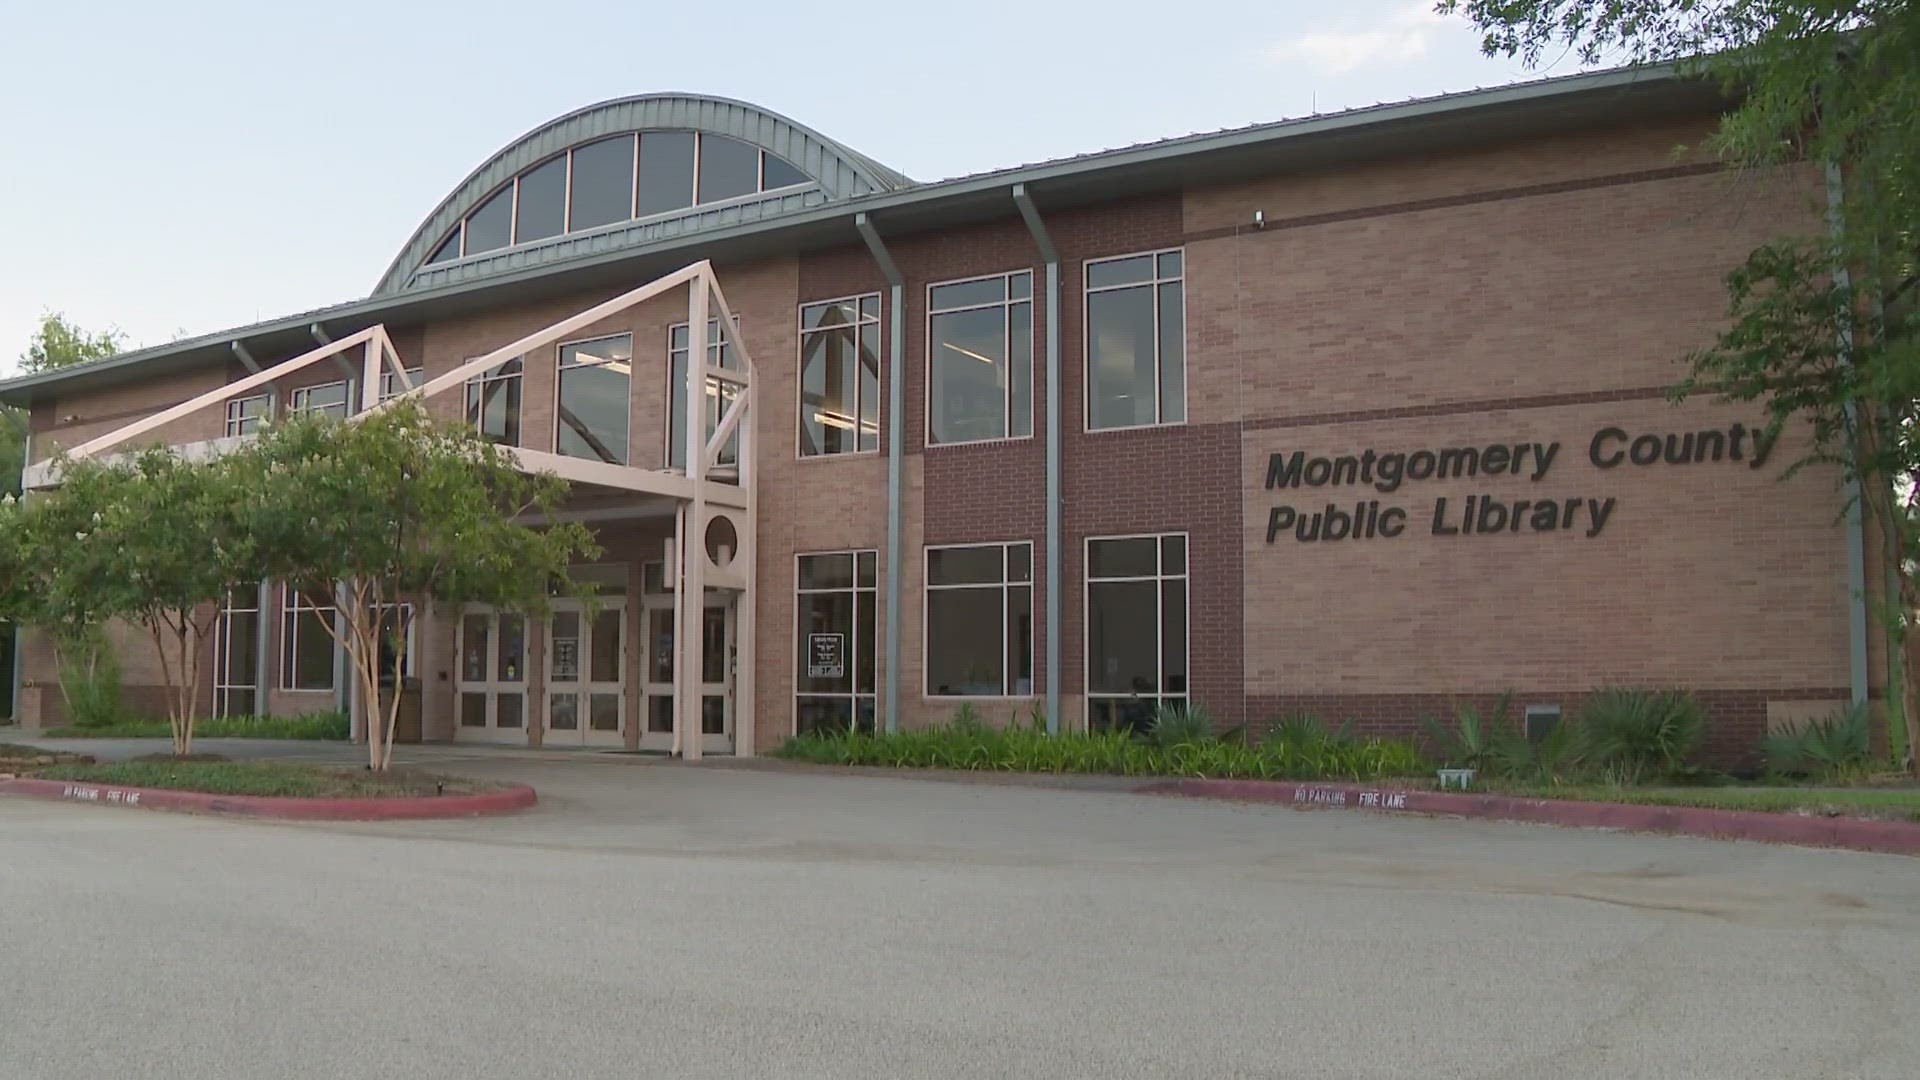 In addition to the new restrictions, county commissioners also voted to add more books with politically conservative themes.